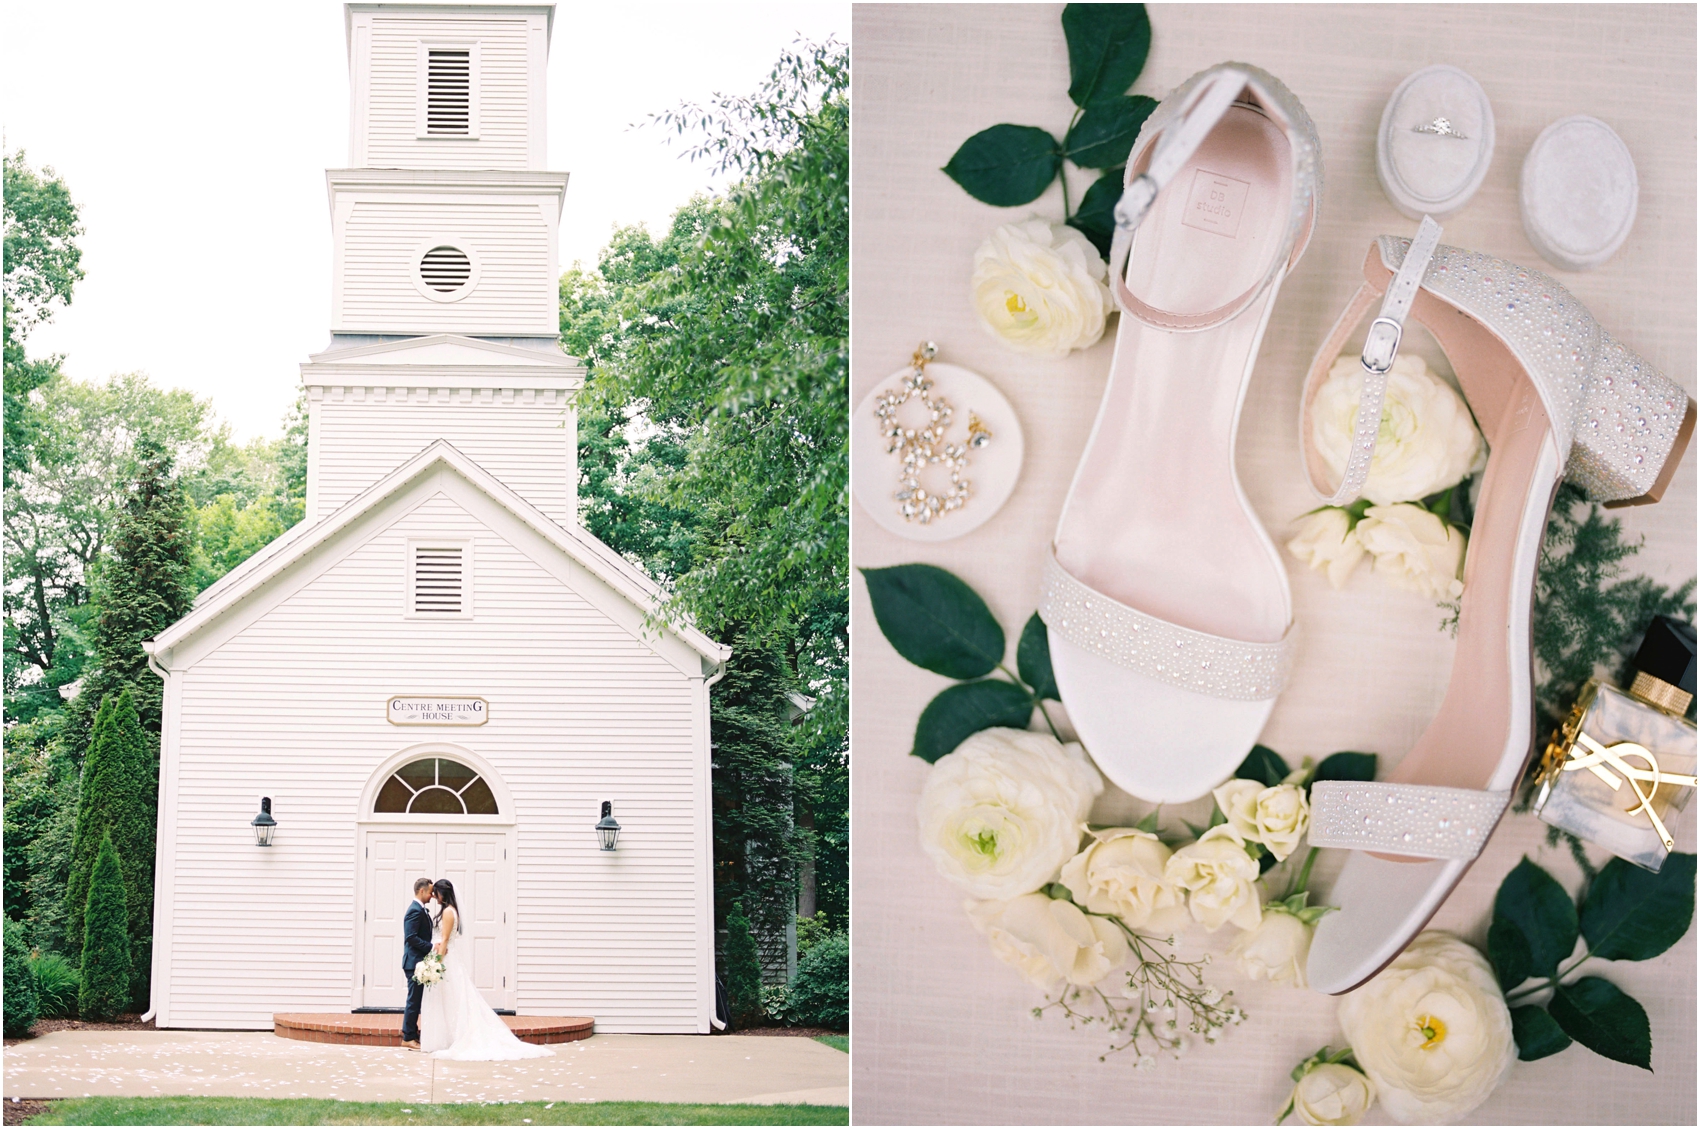 Summer wedding inspiration at The Morris Estate in Niles, Michigan photo by Cynthia Mae Photography